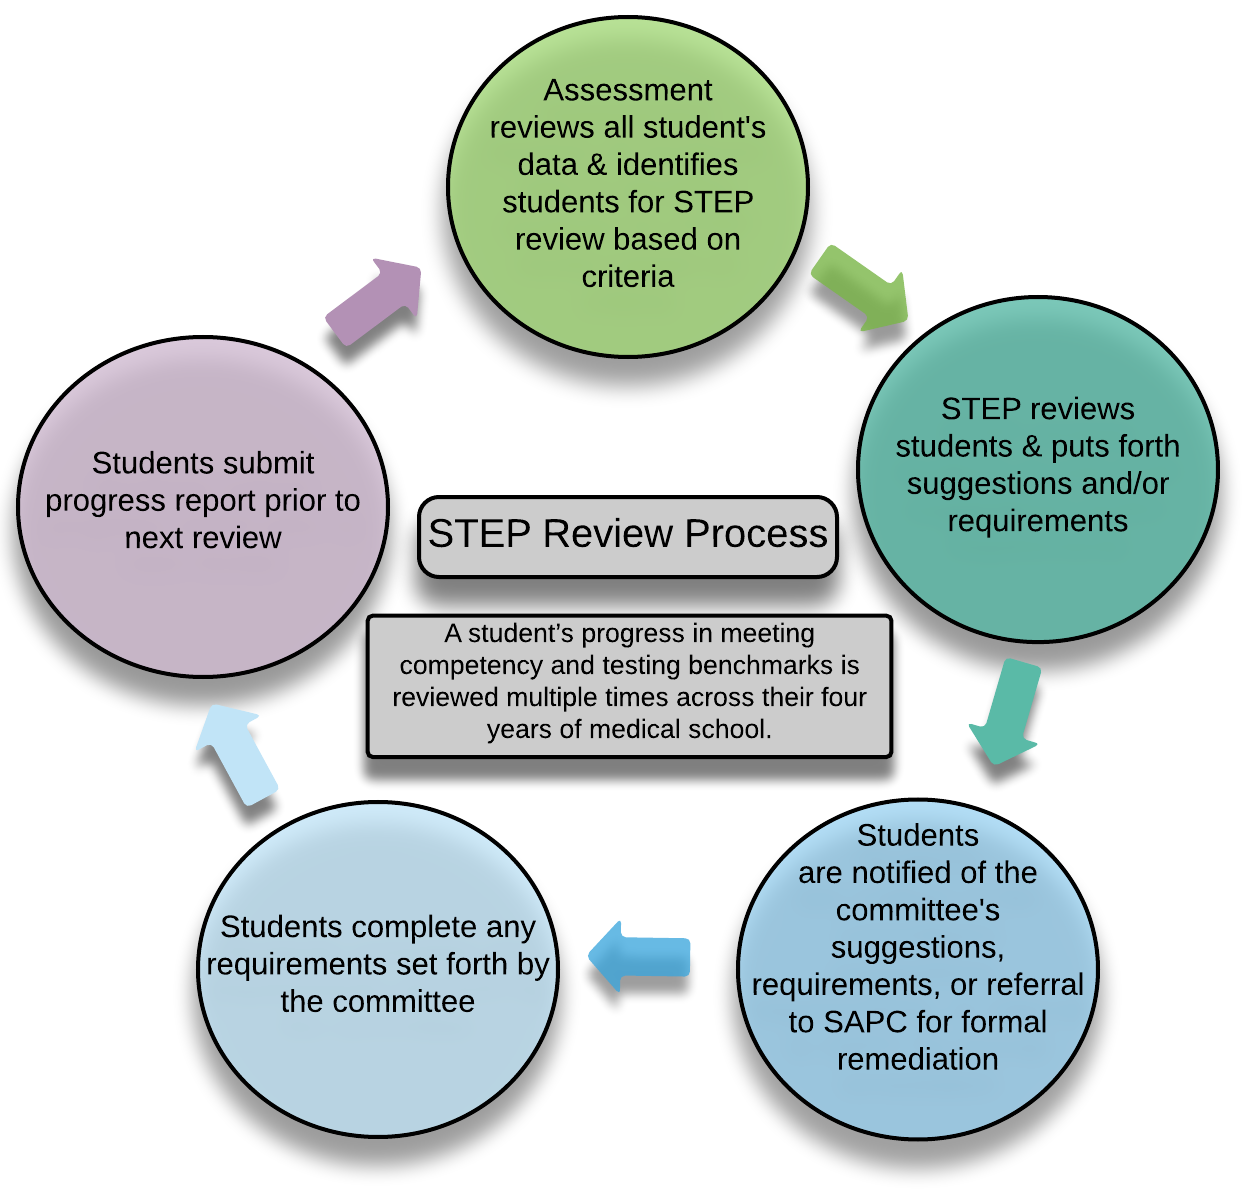 STEP Review Process